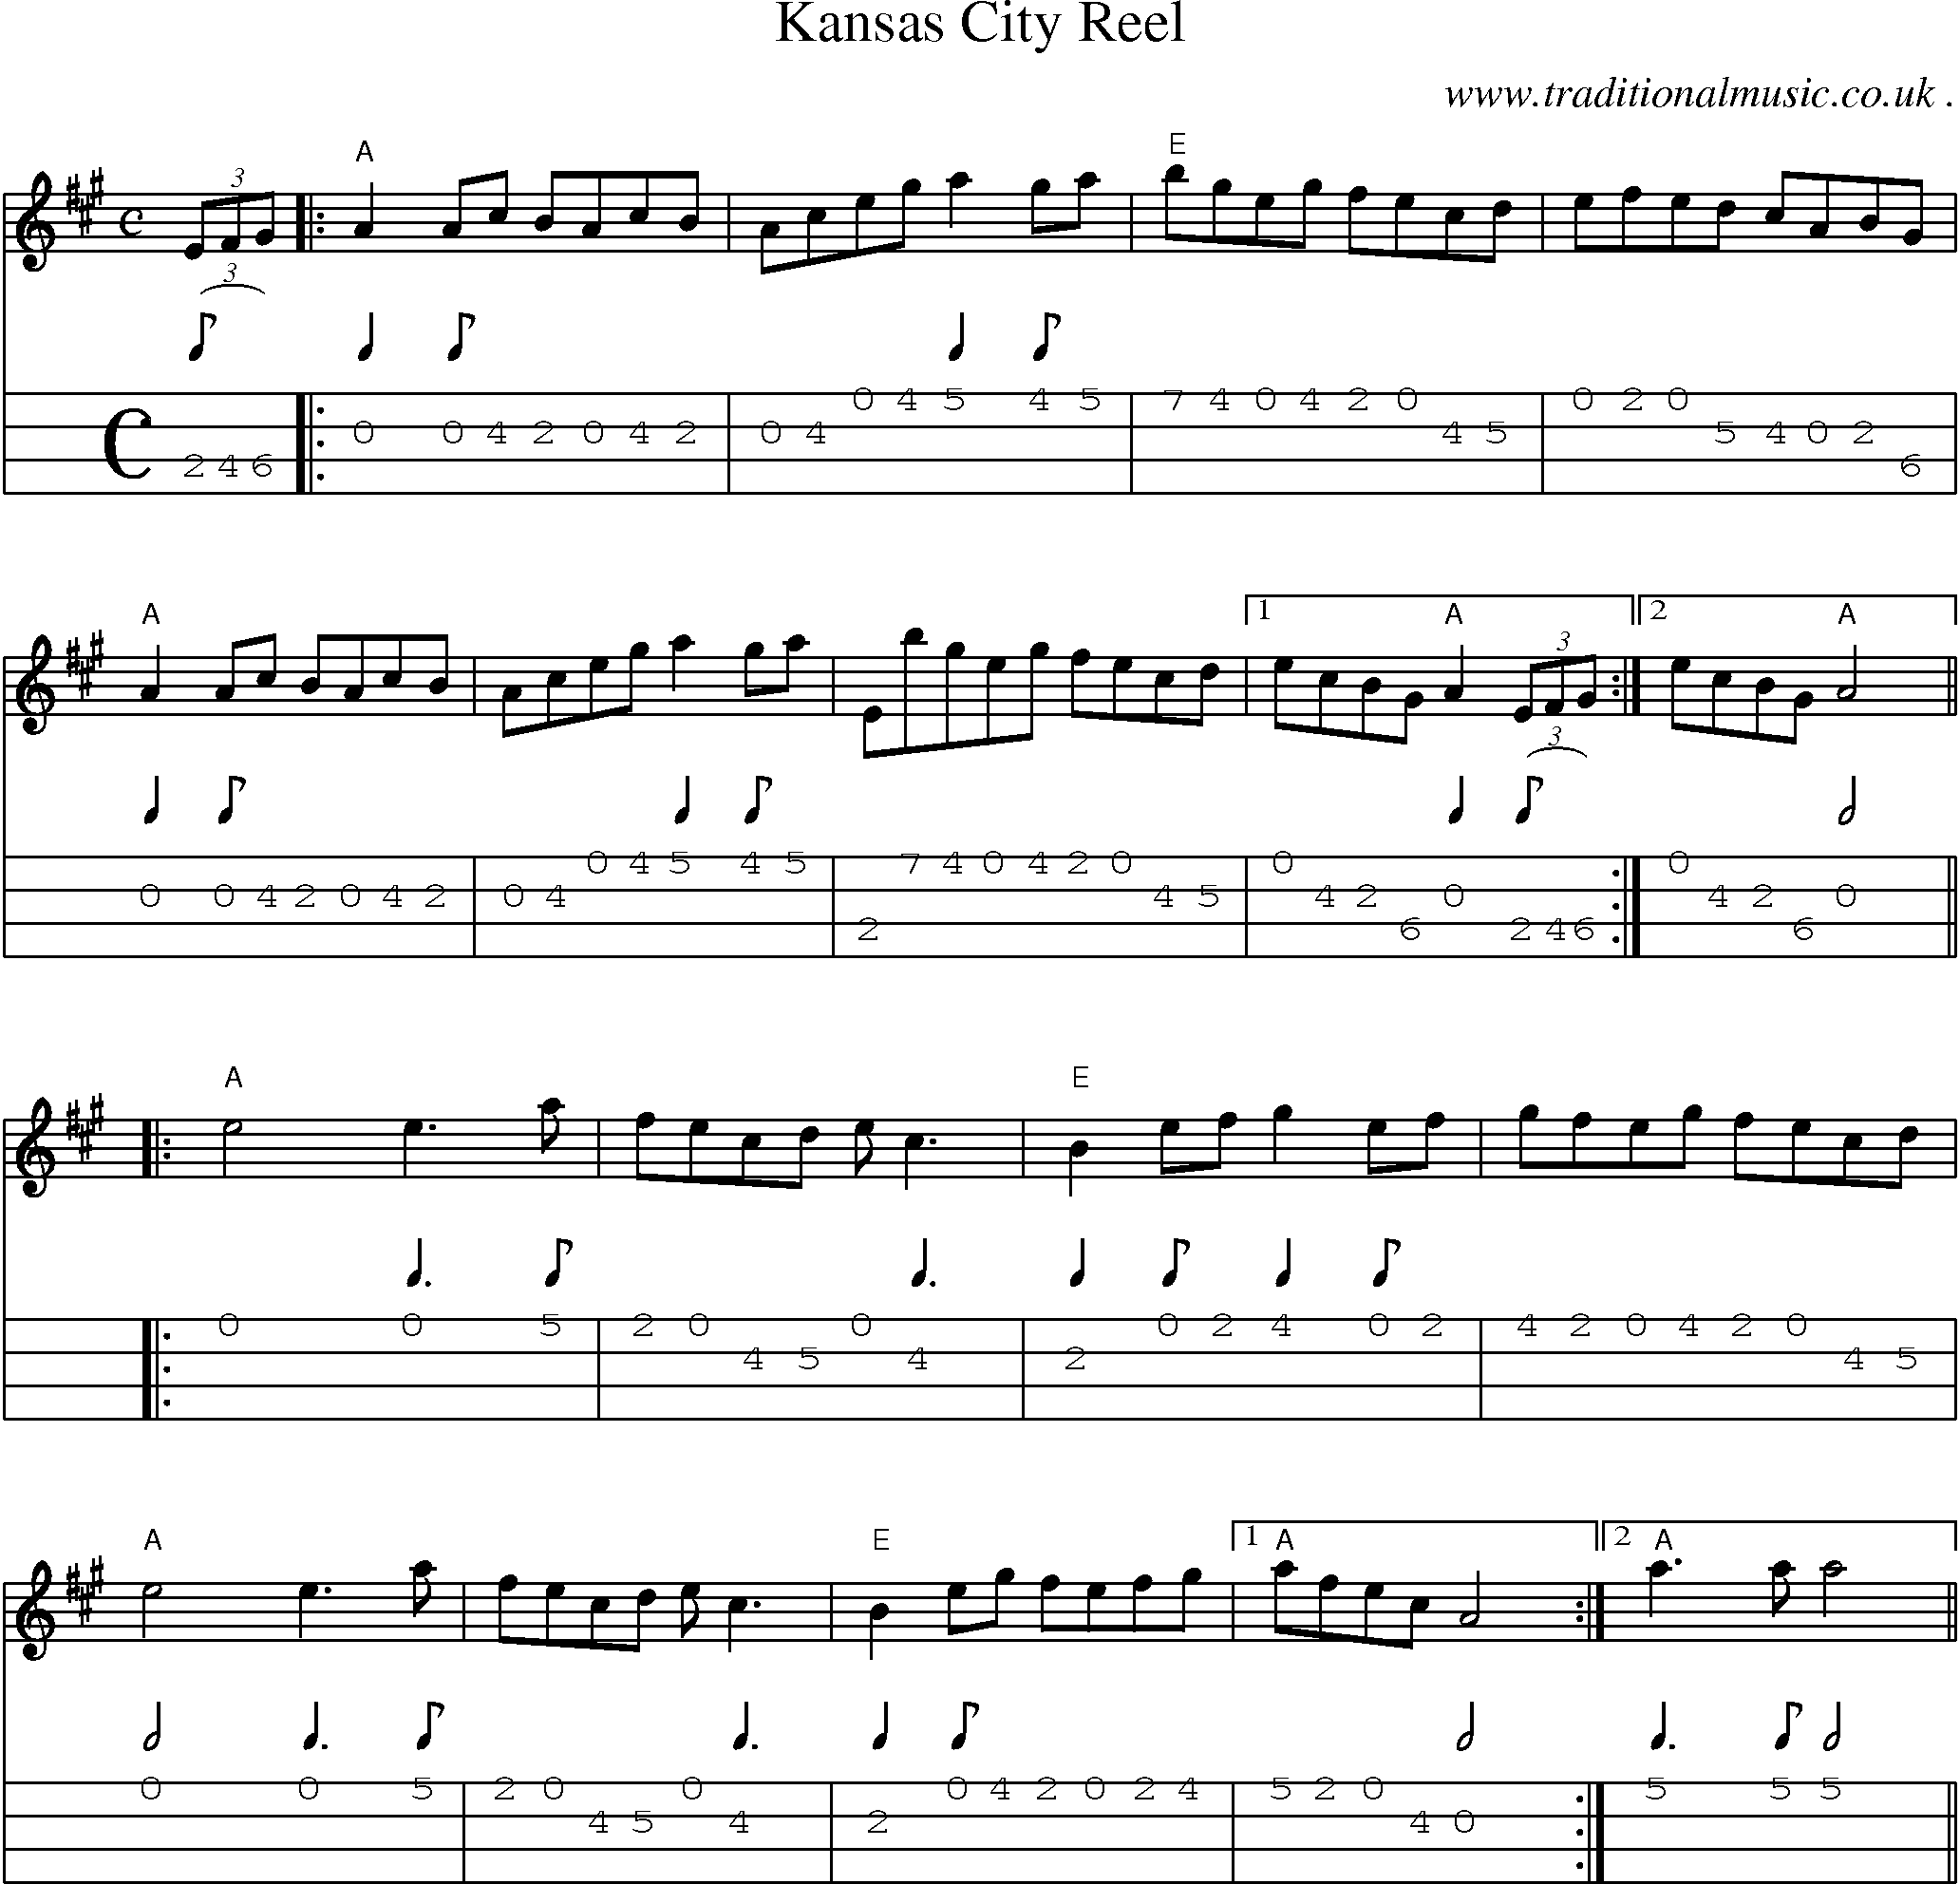 Music Score and Guitar Tabs for Kansas City Reel